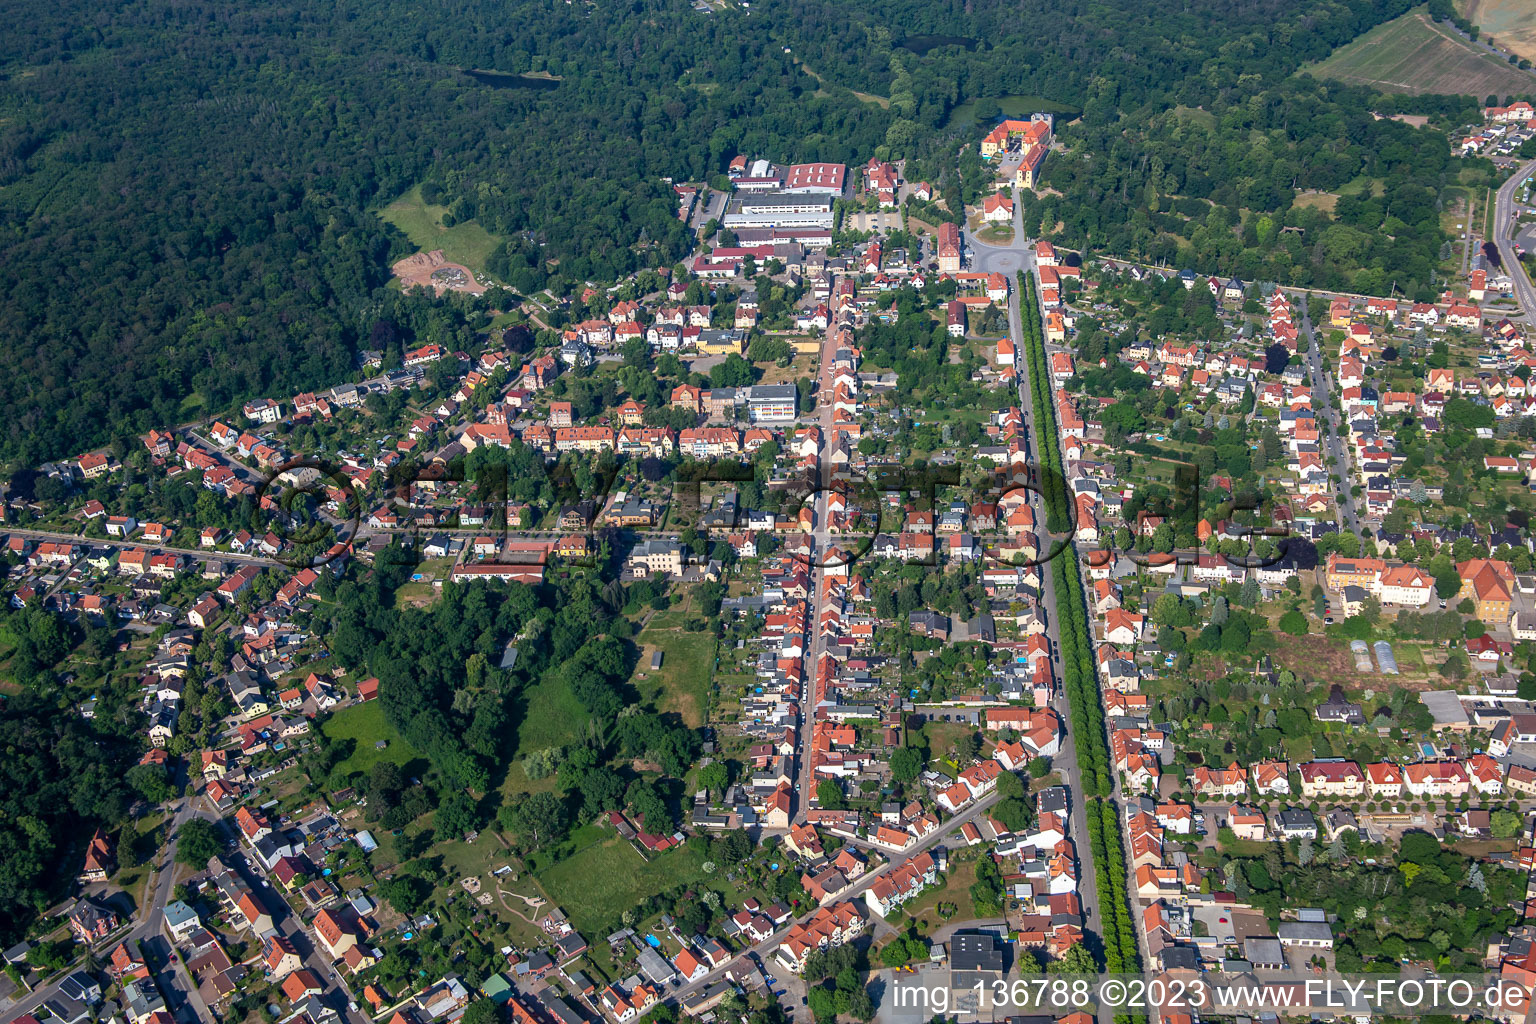 Aerial photograpy of Avenue to the castle in Ballenstedt in the state Saxony-Anhalt, Germany